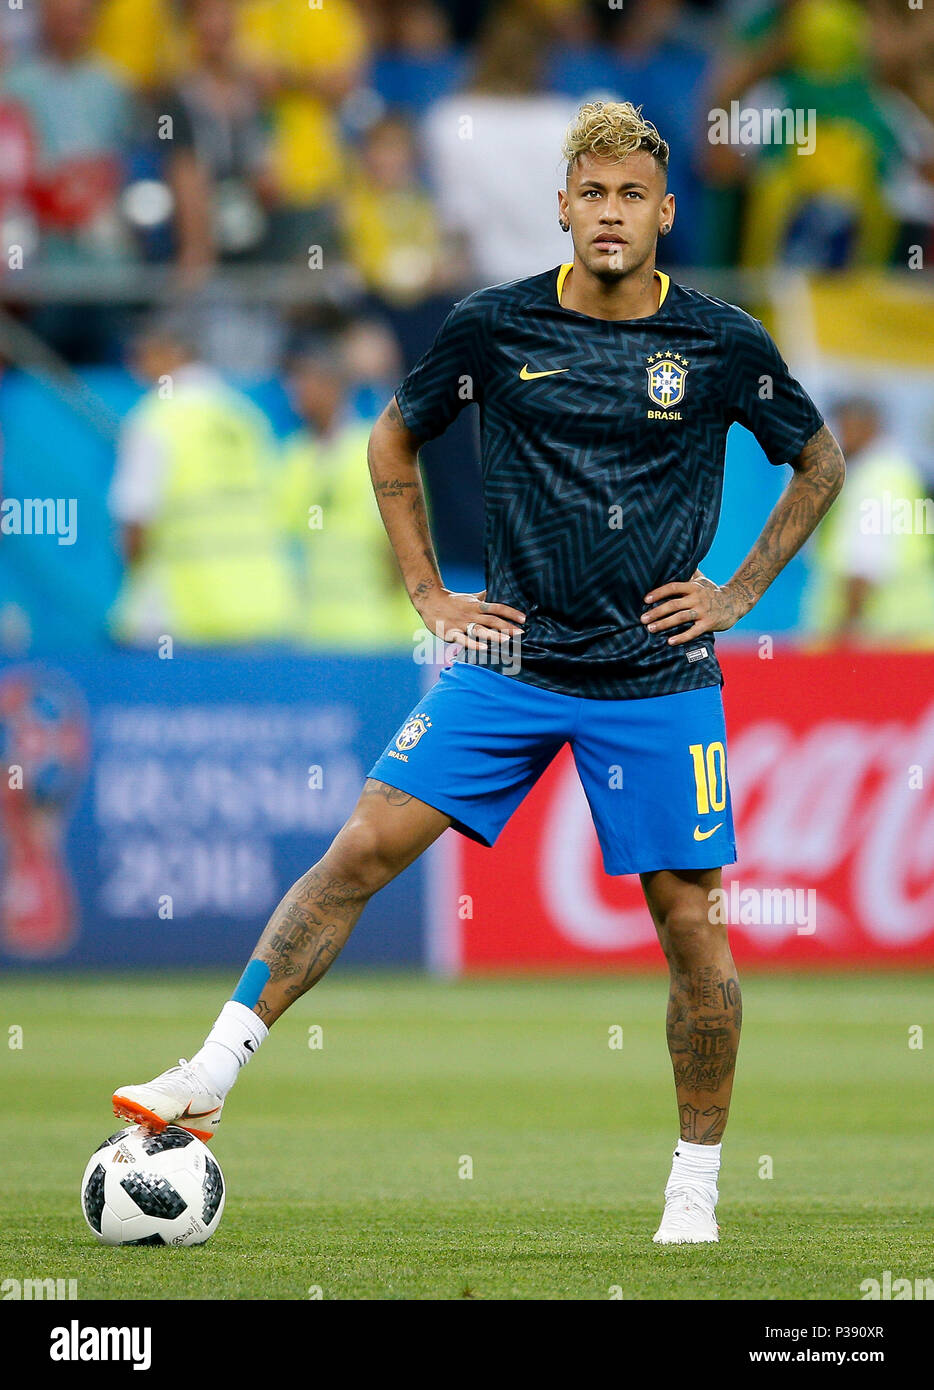 Rostov, Russia. 17th June, 2018. BRAZIL VS SWITZERLAND - Neymar Jr. of Brazil warms up for Brazil-Switzerland match valid for the first round of group E of the 2018 World Cup, held at the Rostov Arena in Rostov on Don, Russia. (Photo: Marcelo Machado de Melo/Fotoarena) Credit: Foto Arena LTDA/Alamy Live News Stock Photo